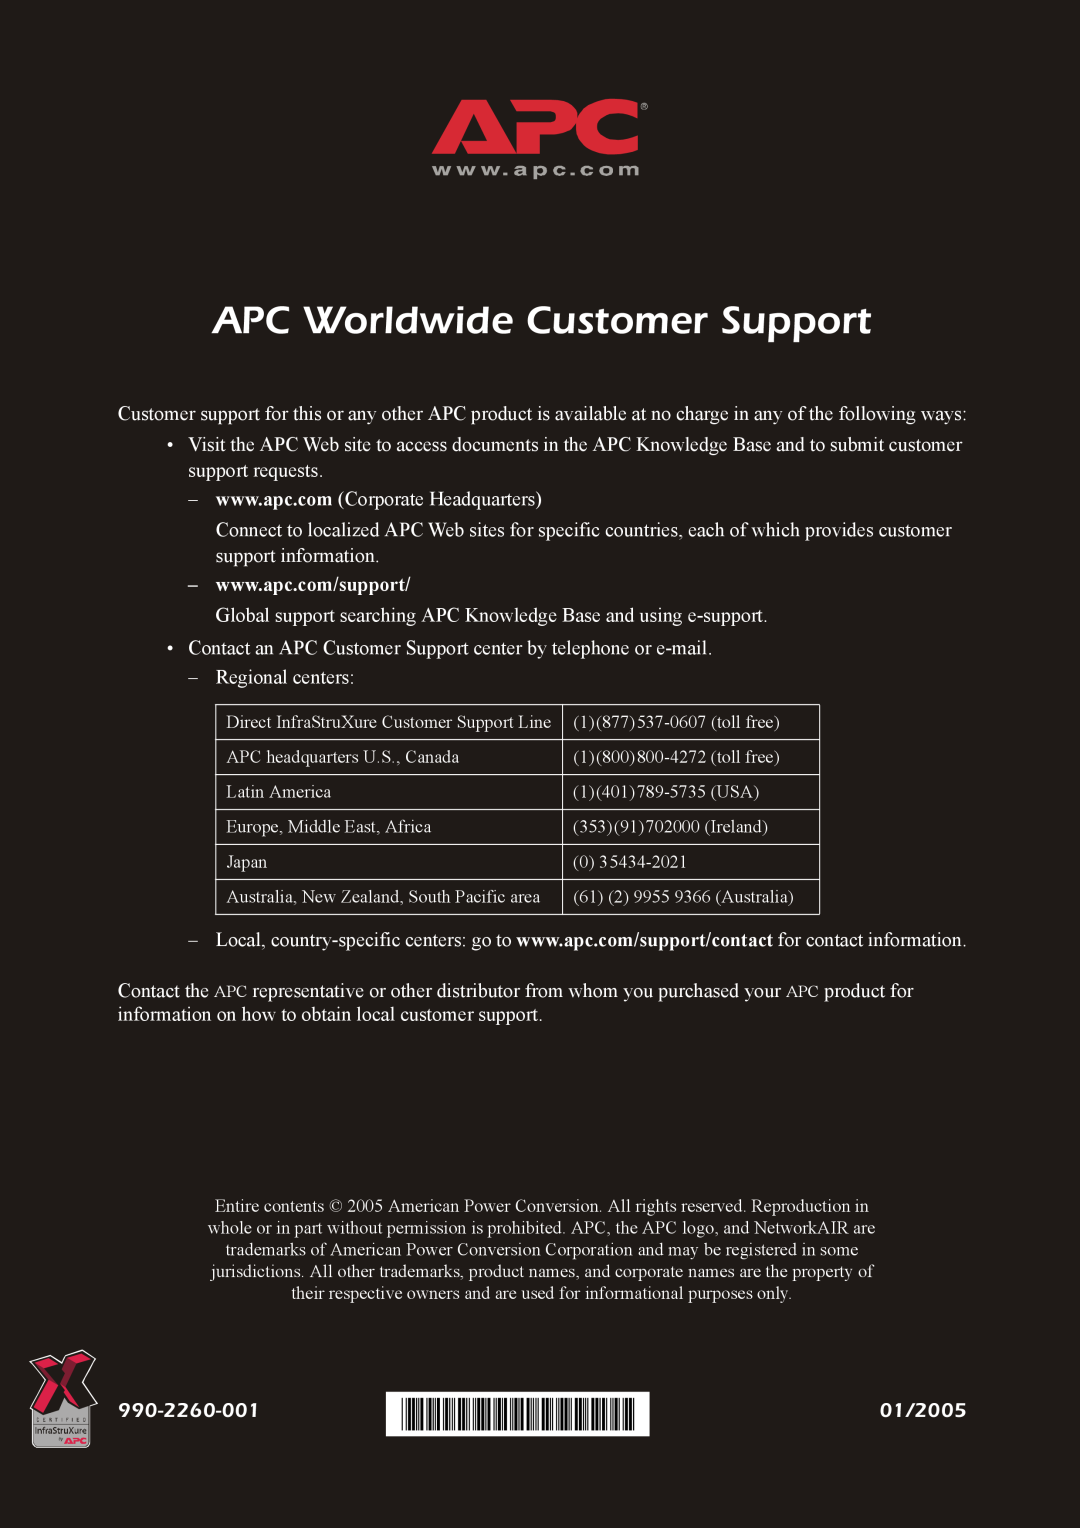 American Power Conversion Central Air Conditioning System manual APC Worldwide Customer Support, 990-2260-001, 01/2005 